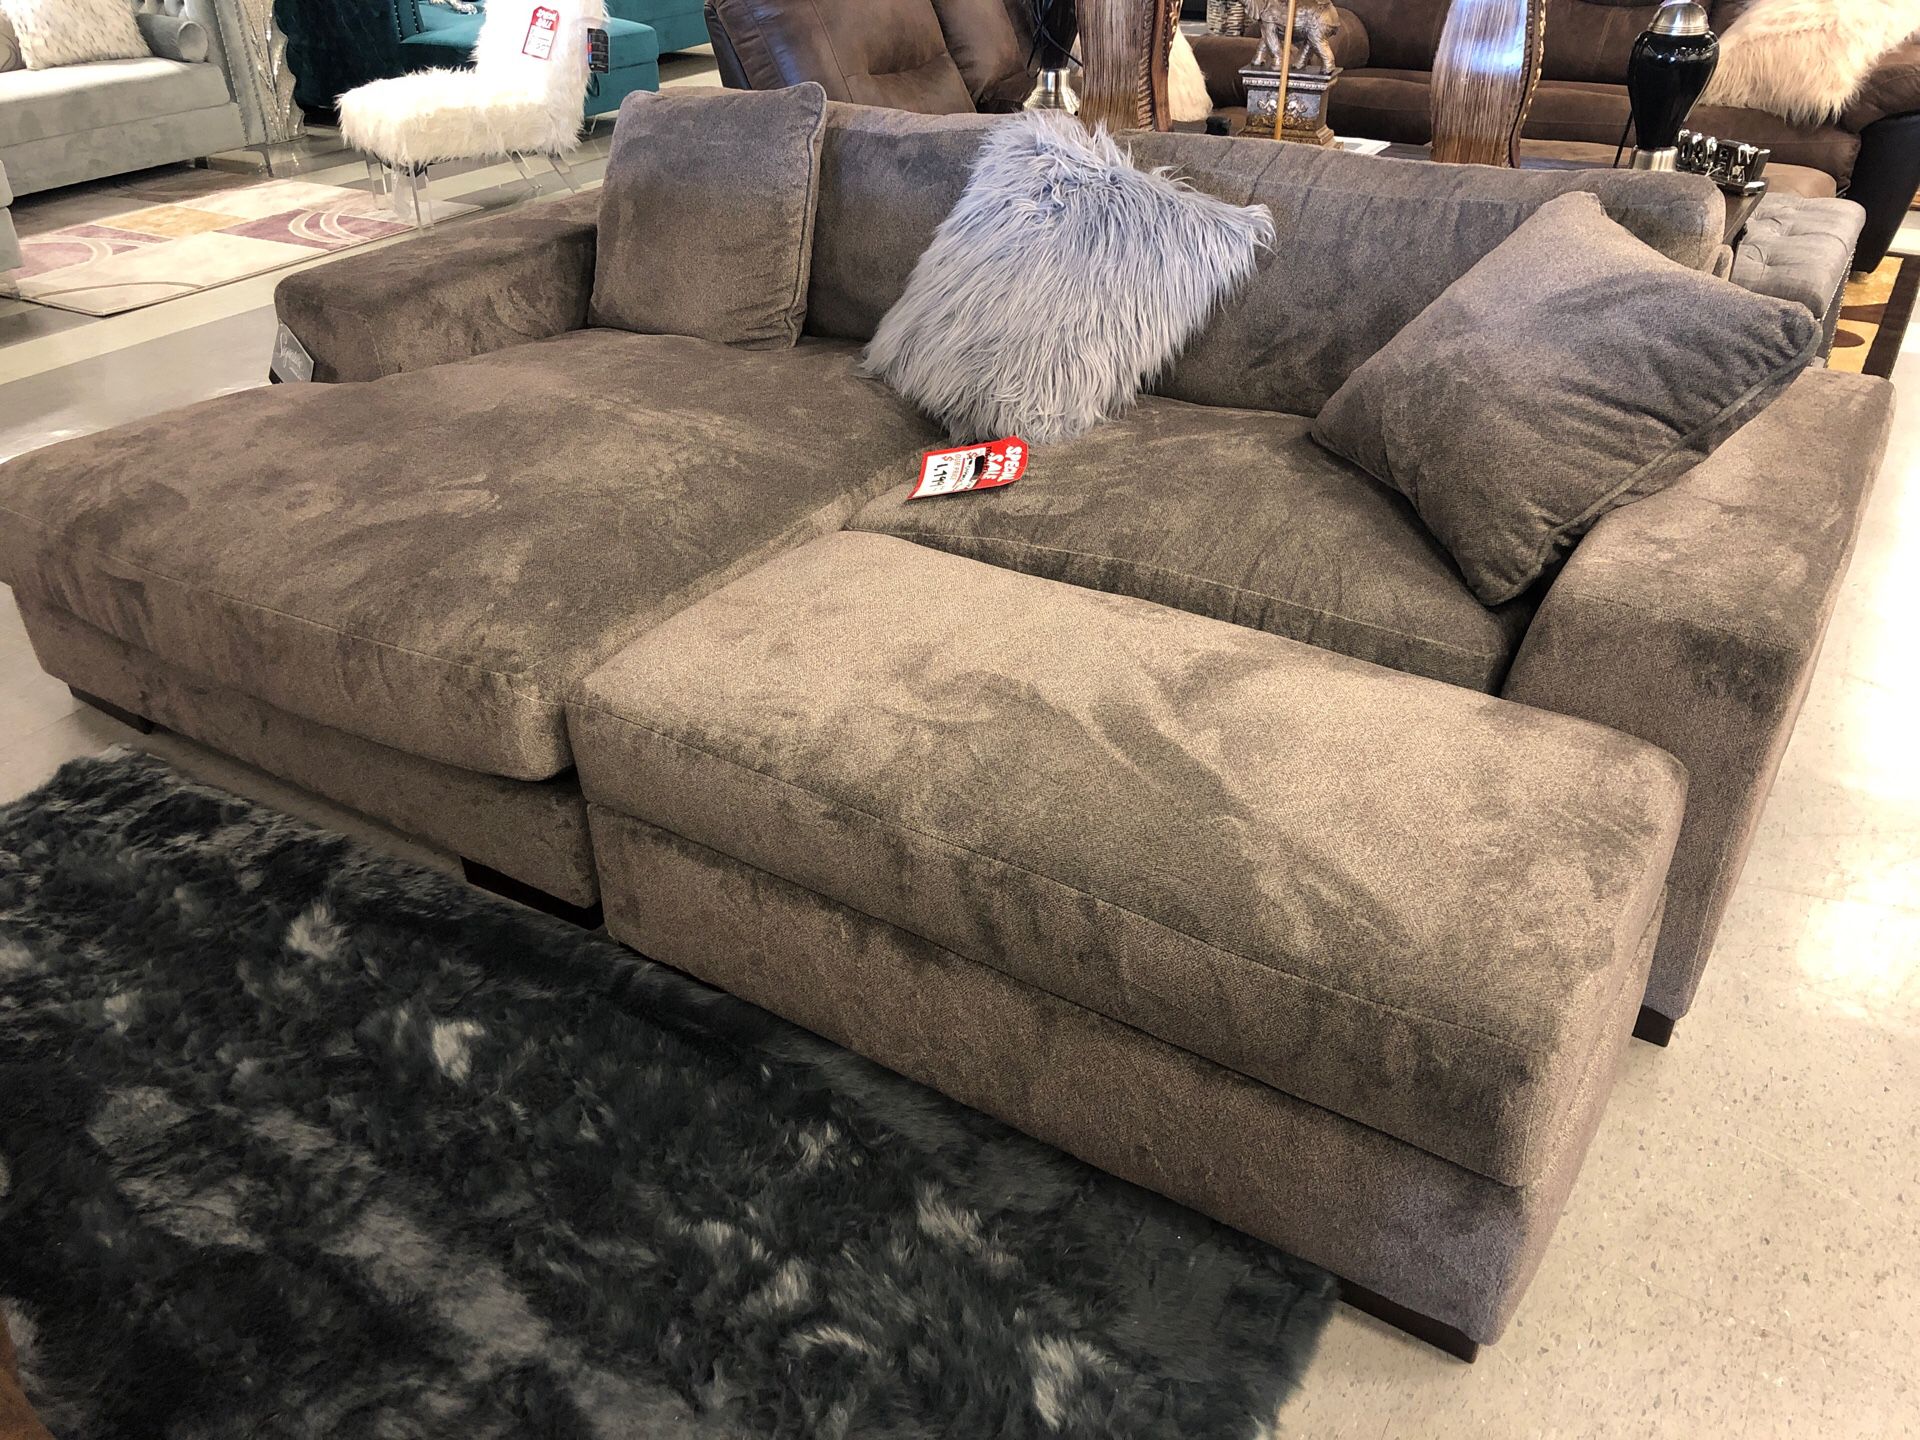 Huge display sale on furniture market items in store only